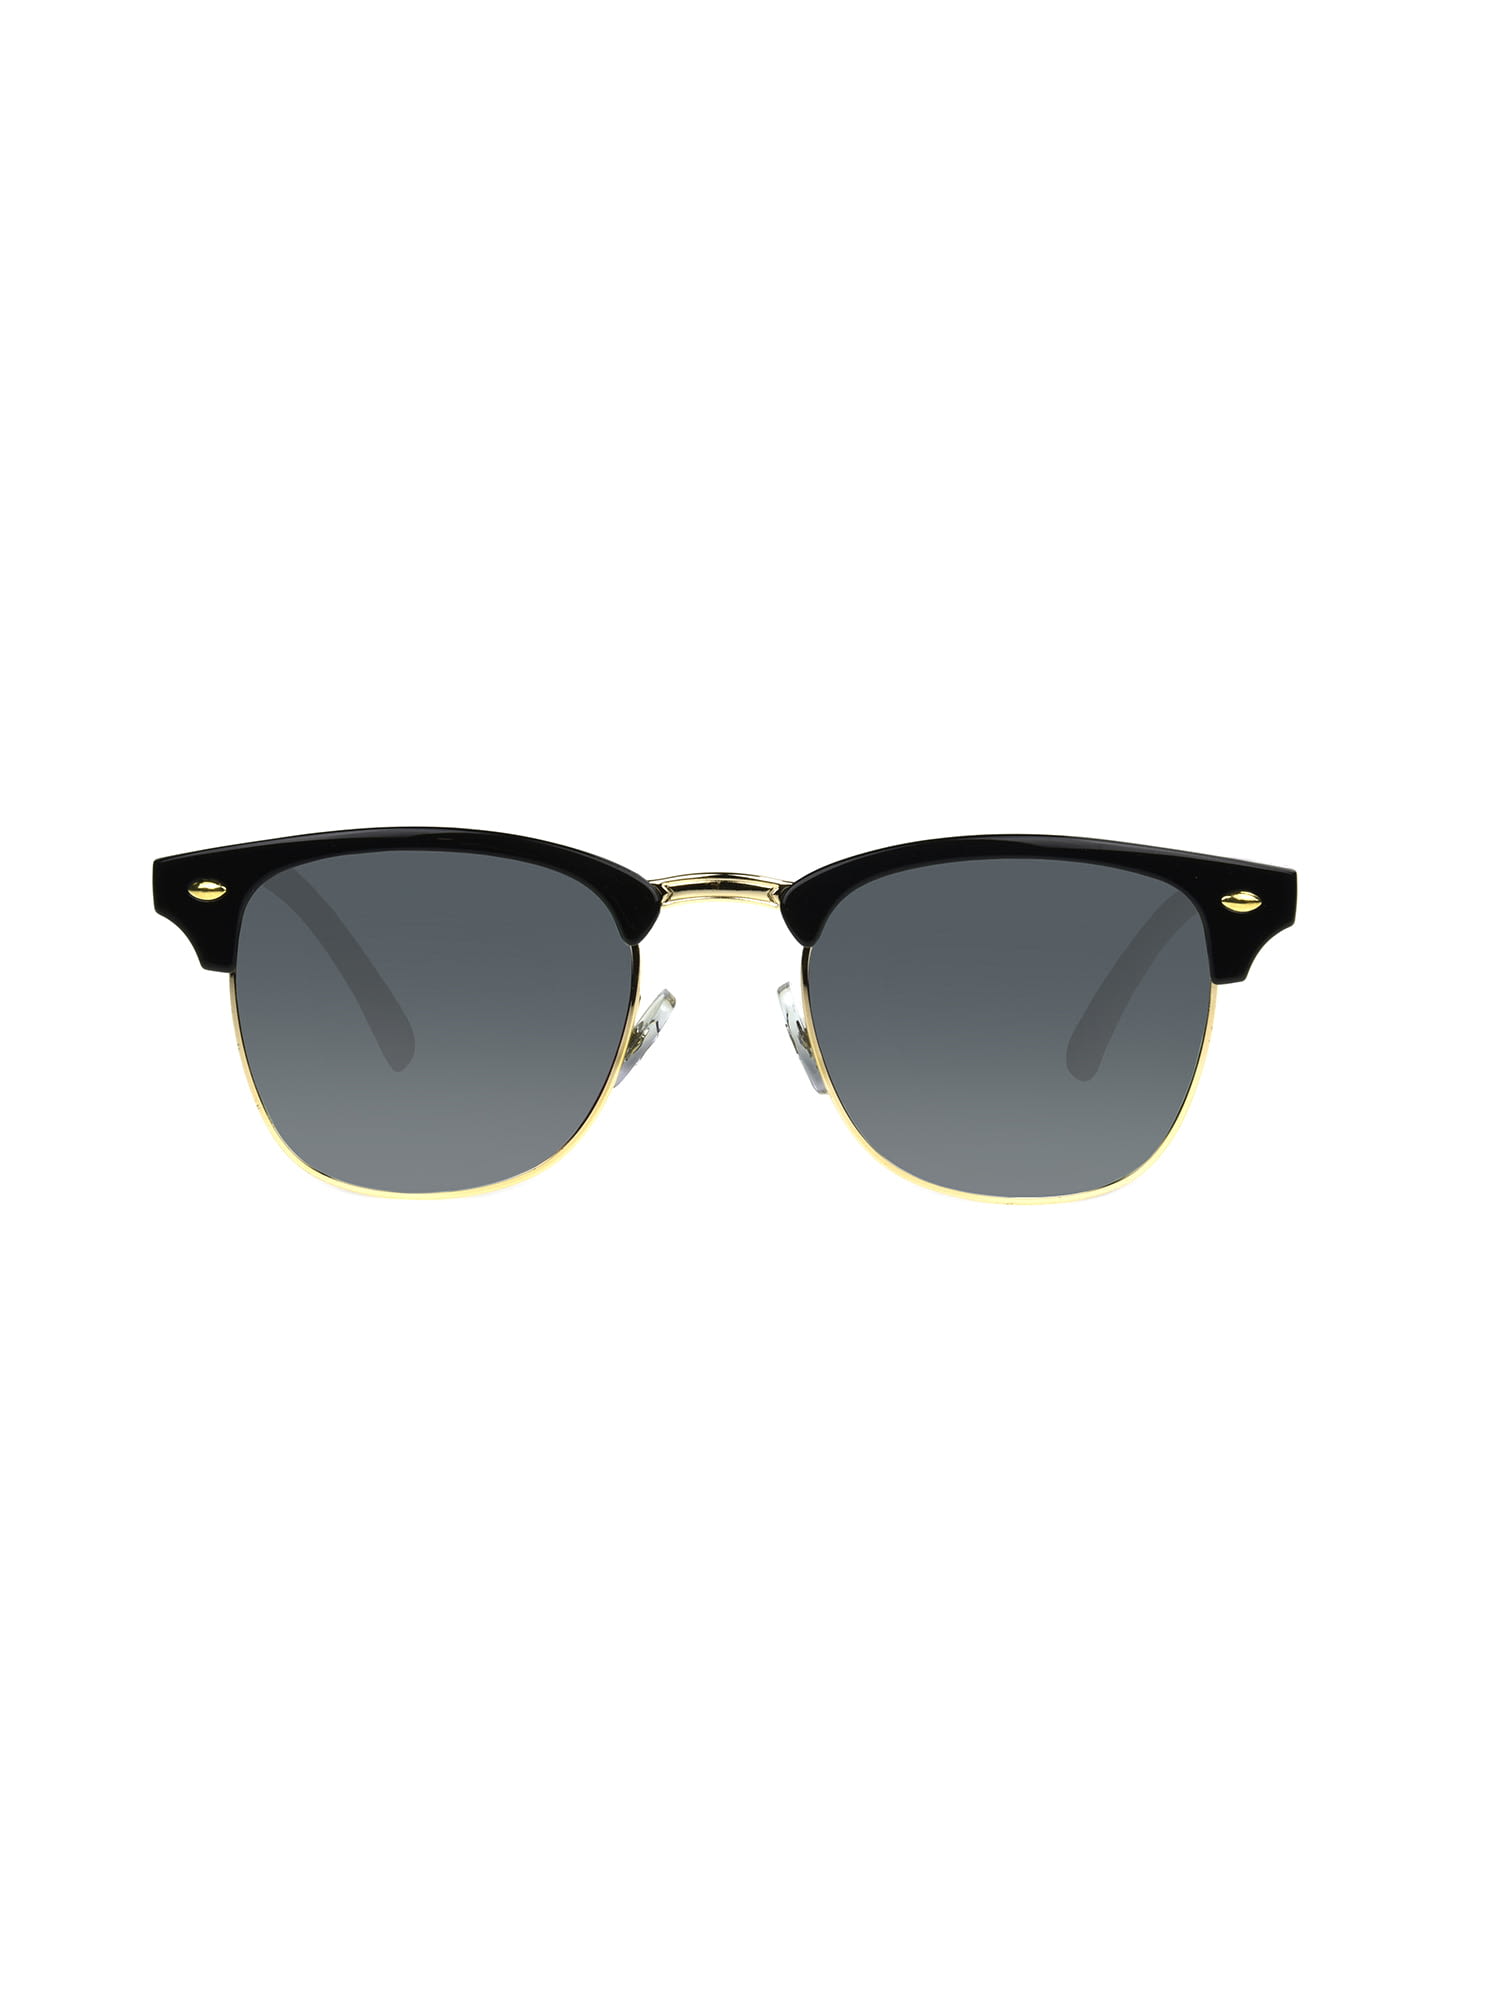 Foster Grant Women's Club Black Sunglass - DroneUp Delivery